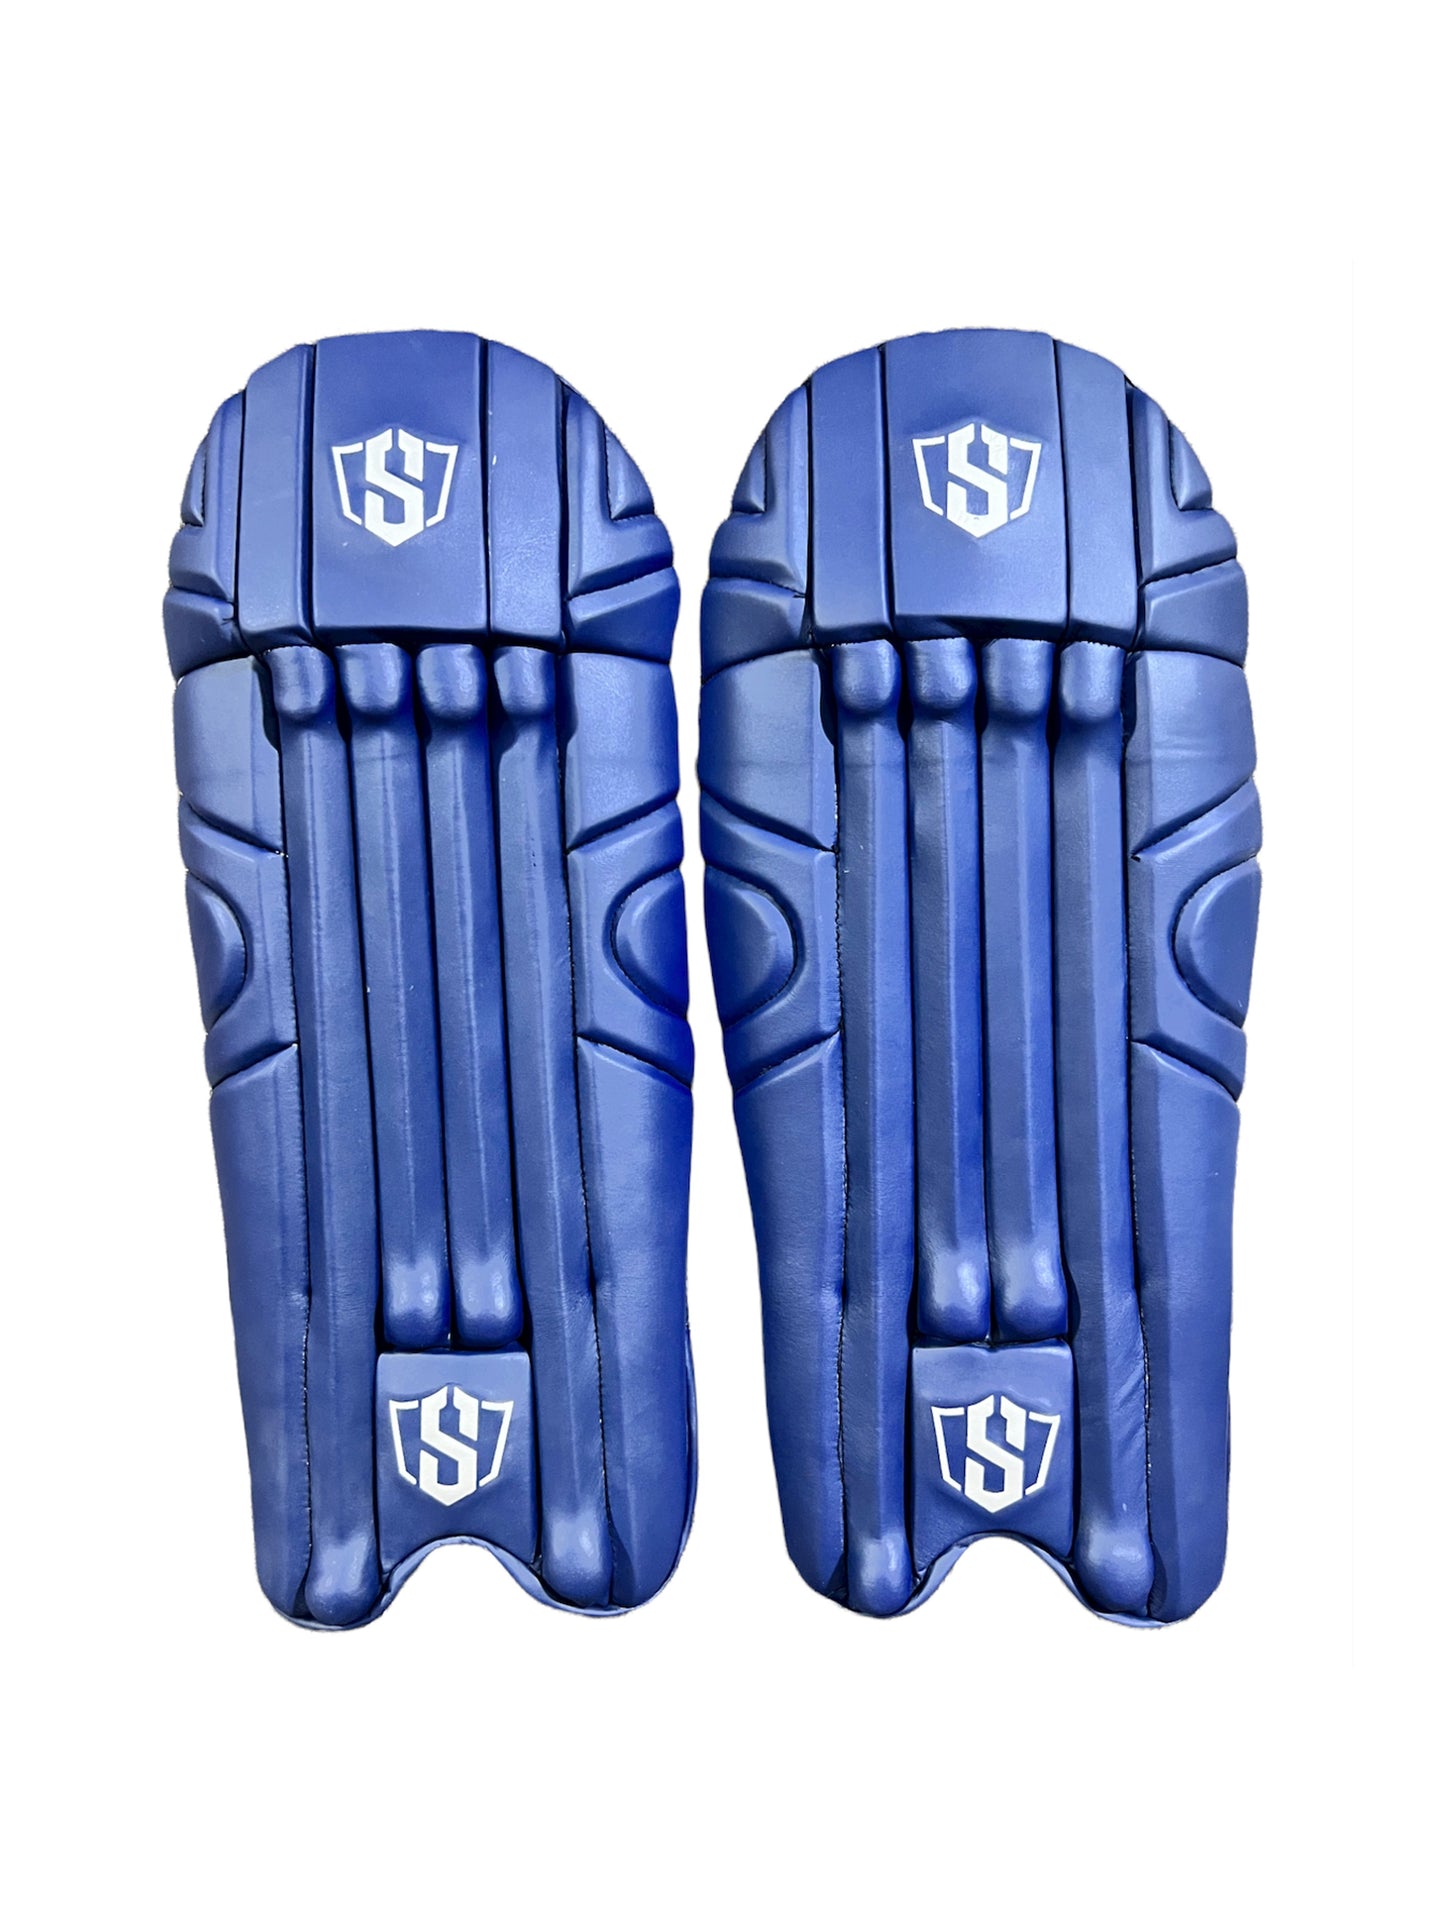 Swar Players Wicket keeping Pads